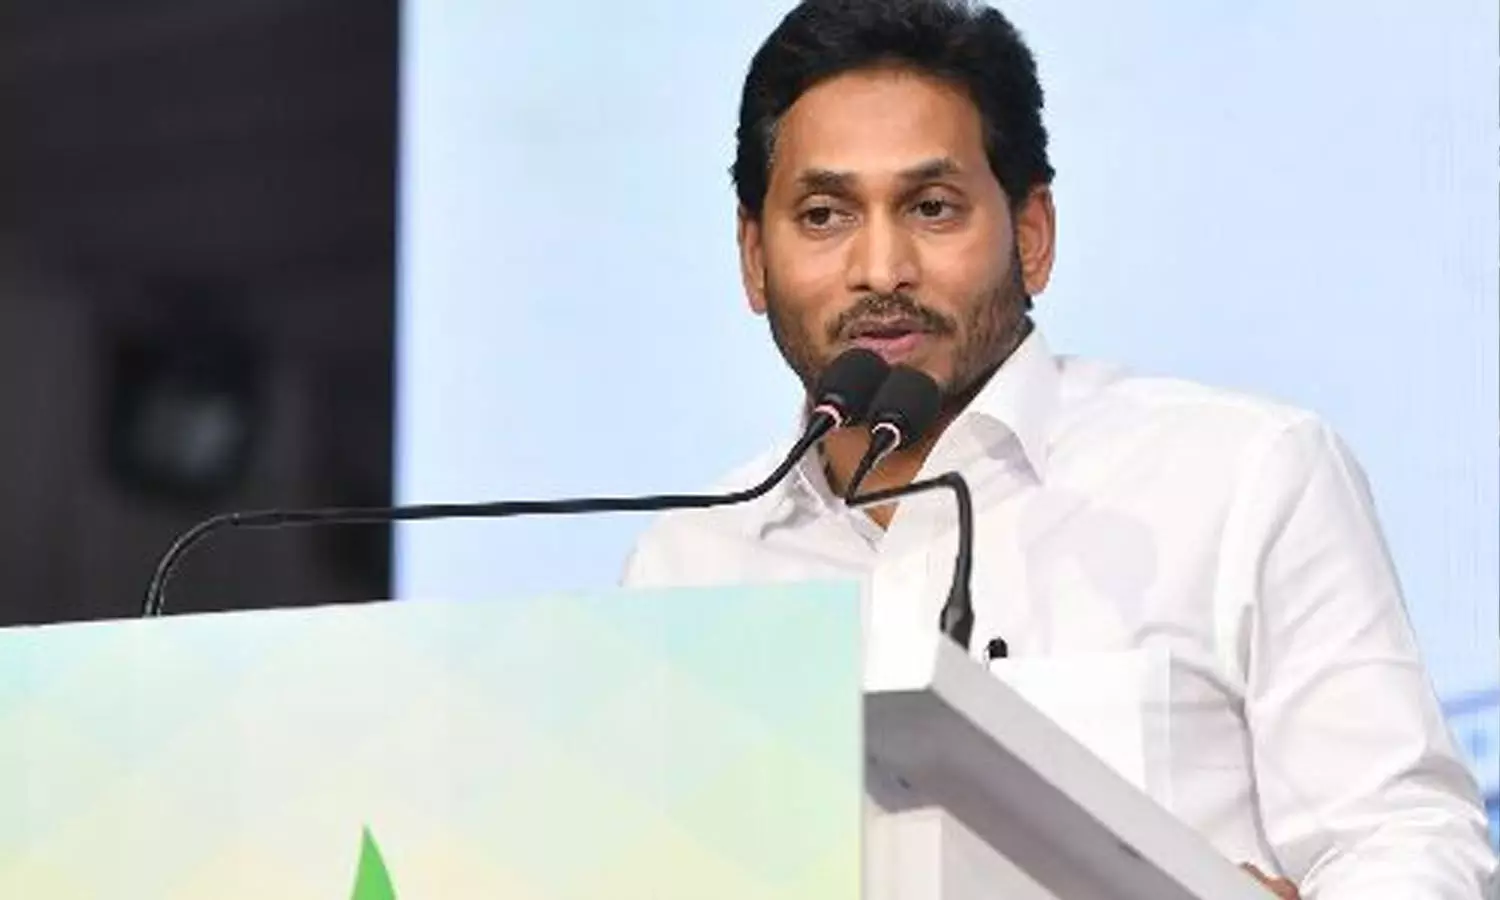 YS Jagan asks investors to ground projects quickly, promises speed in facilitation